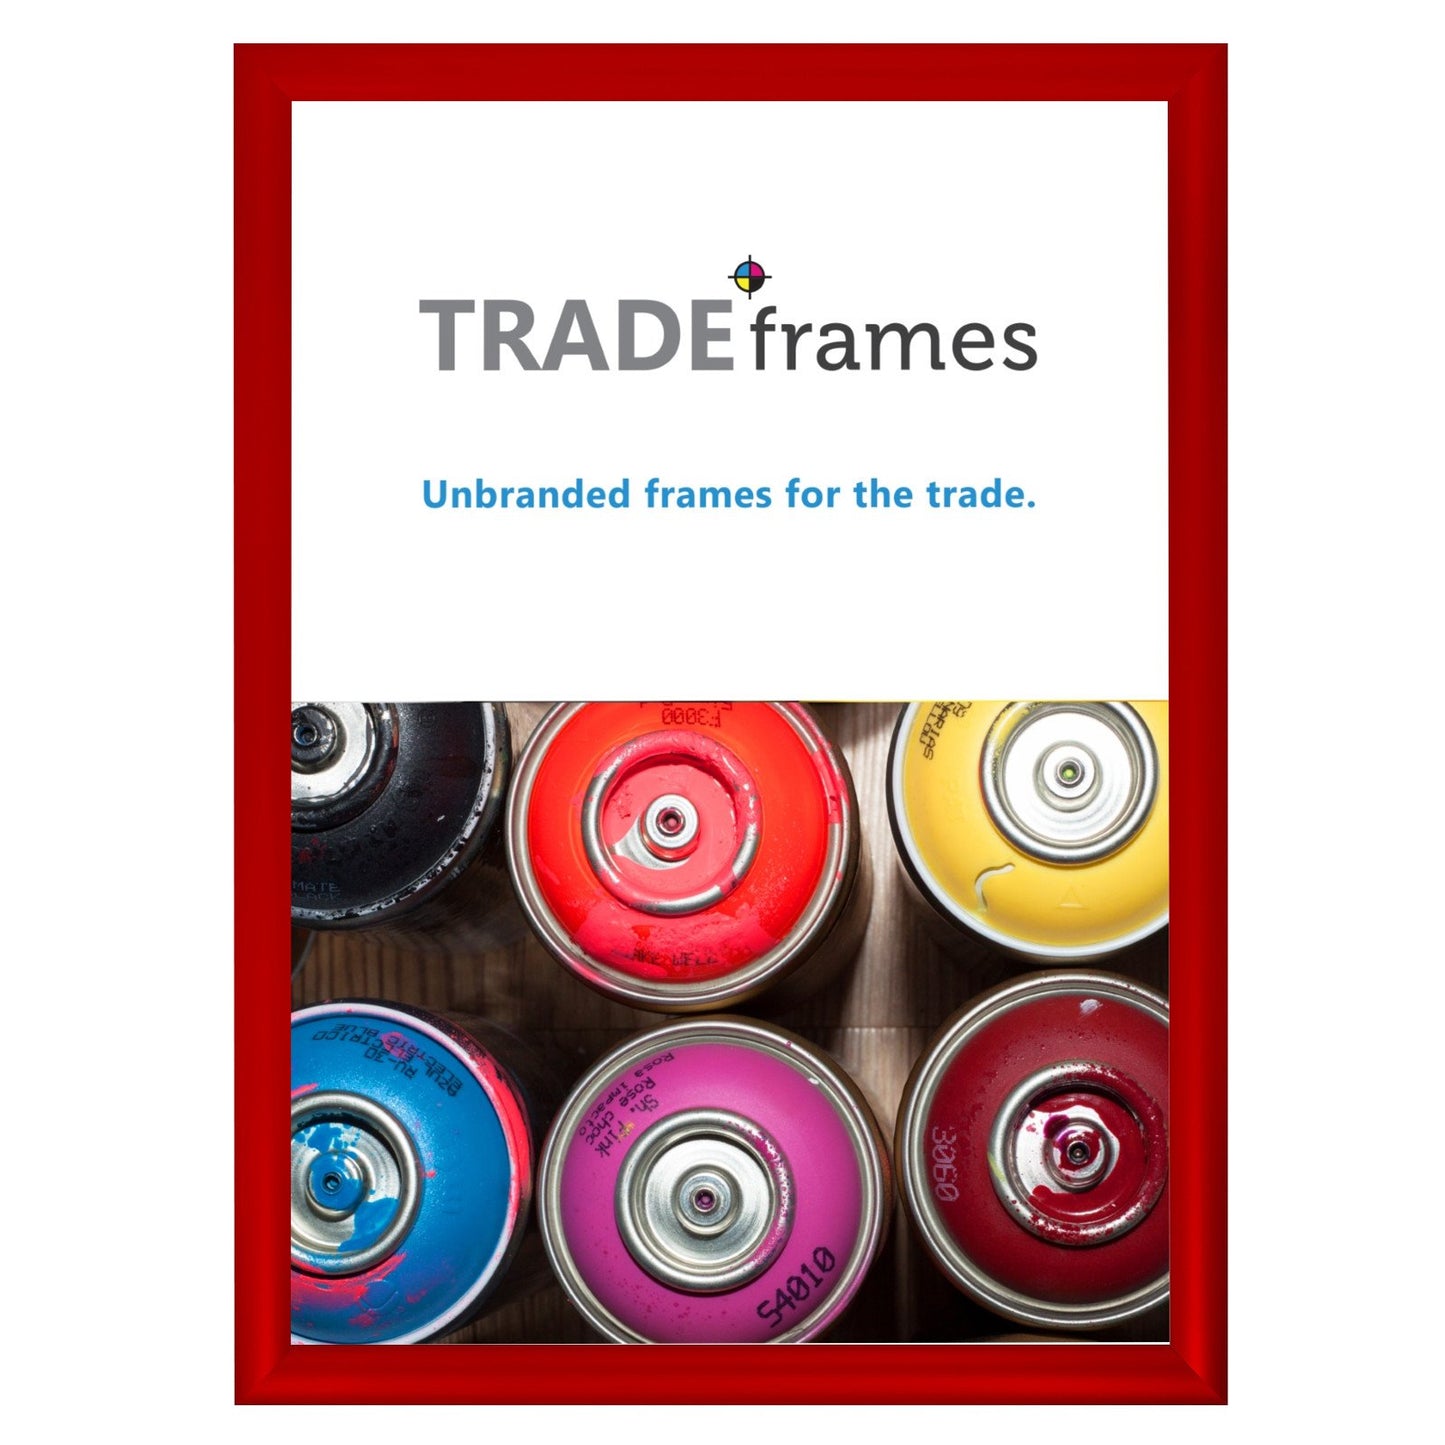 A3 (42 x 29.7 cm) Red Snap Frame - 30MM Profile